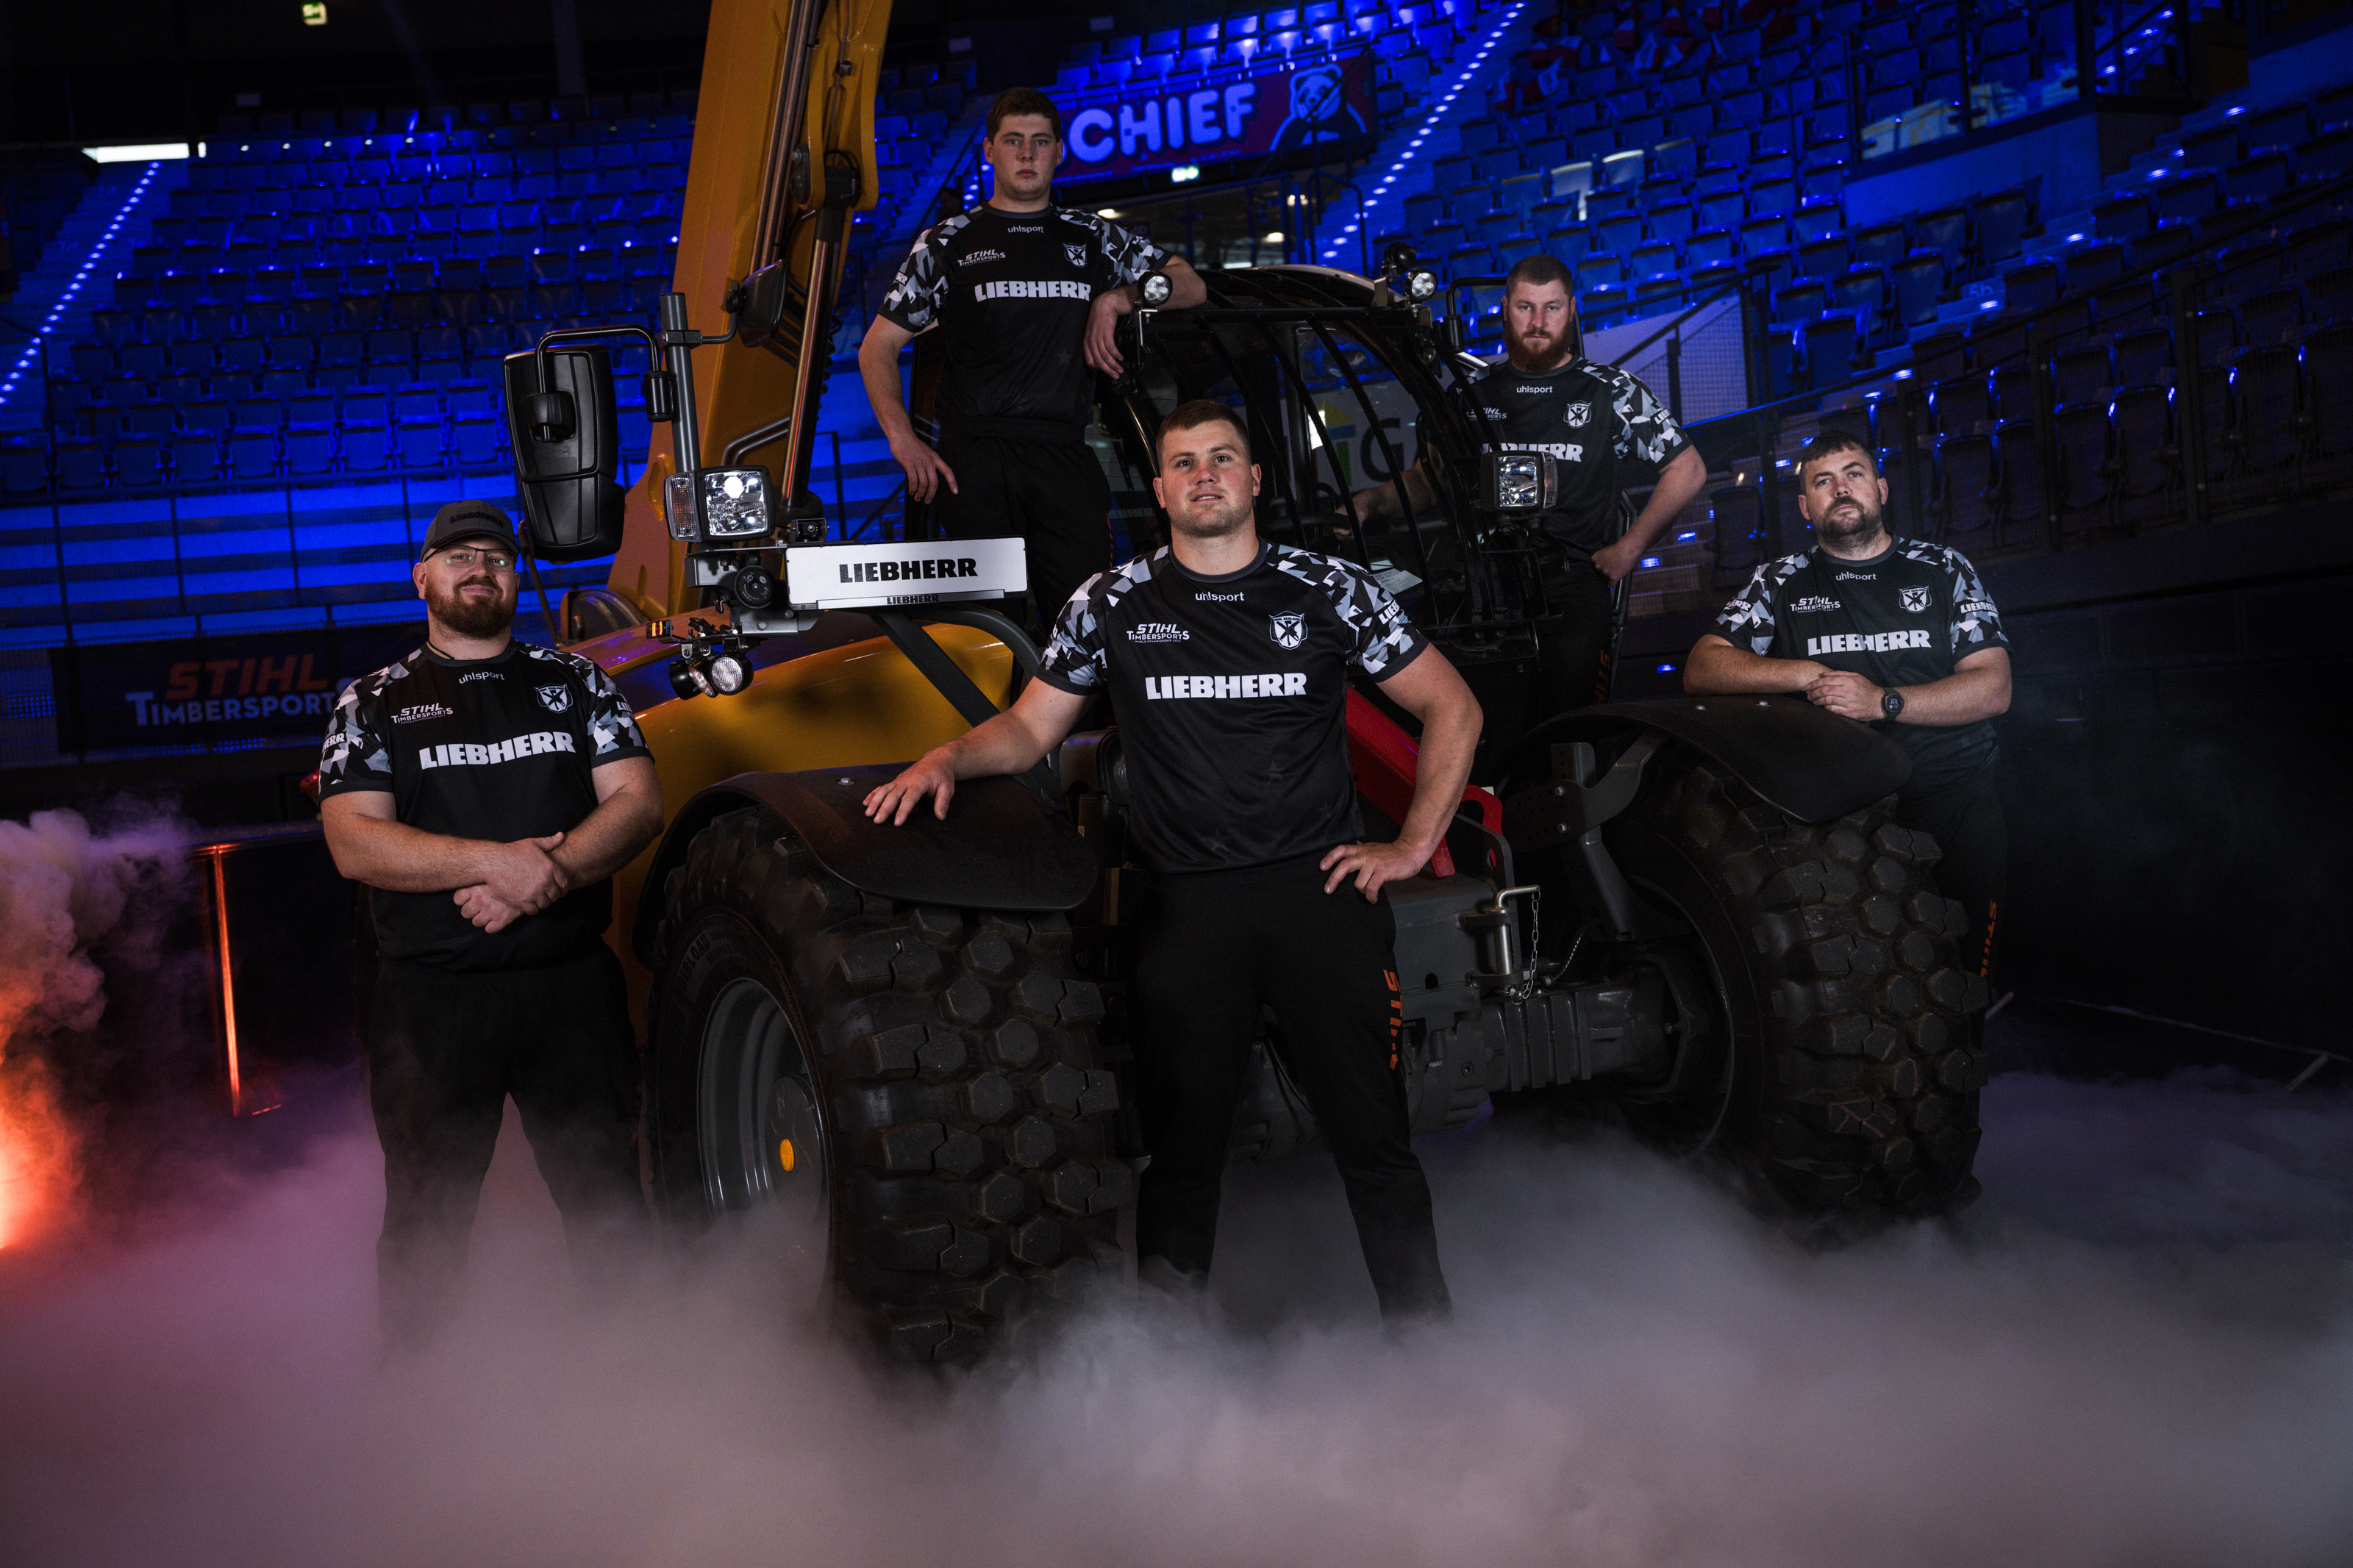 The extreme sports series STIHL TIMBERSPORTS® and the construction machinery manufacturer LIEBHERR are extending their partnership until 2026. LIEBHERR will remain the main sponsor of  the World Championships and sponsor of the World Trophy and European Trophy. Pictured: Team New Zealand at the 2023 World Championships in Stuttgart.